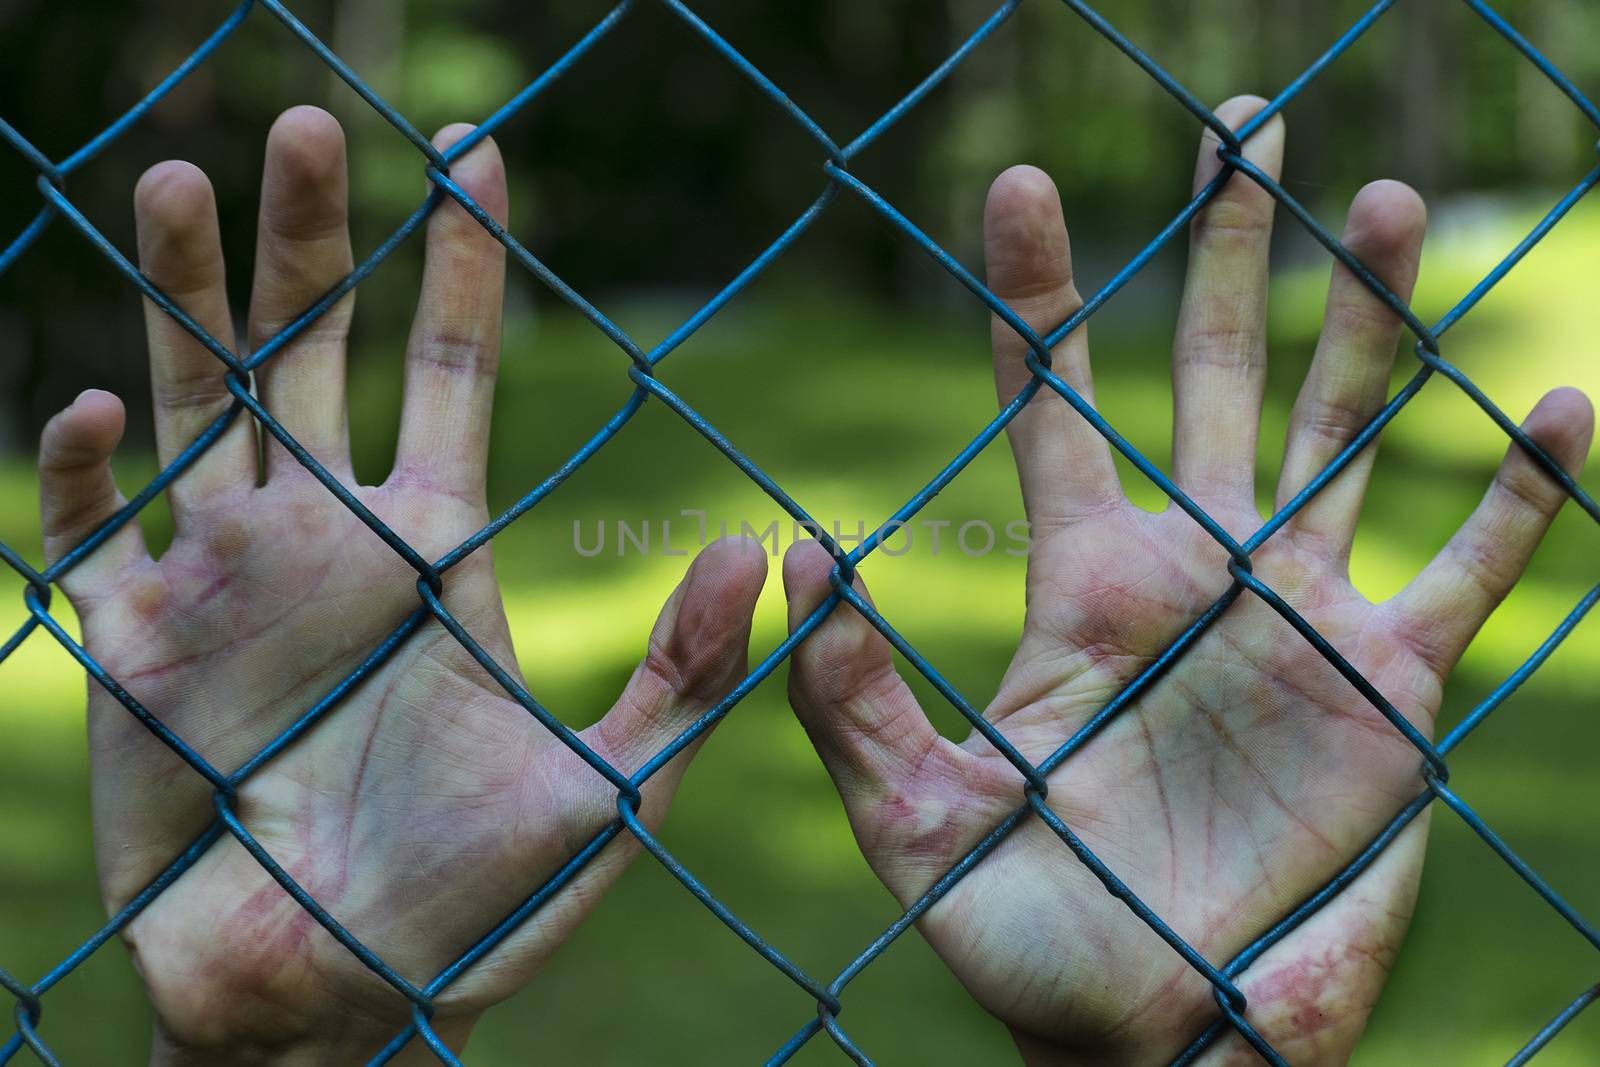 Man hands in jail. Imprisonment. Poverty, suffering.